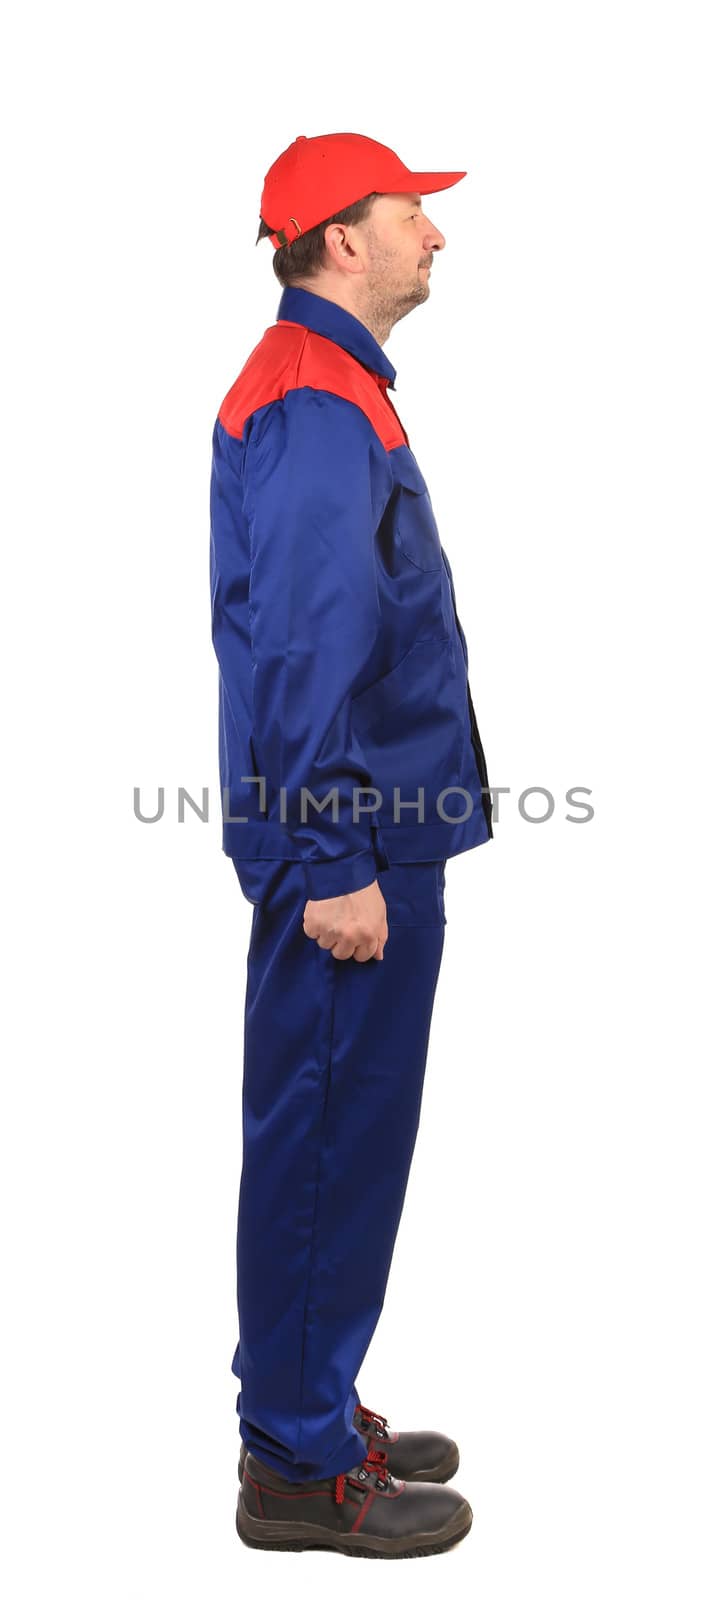 Man in blue and red overalls by indigolotos